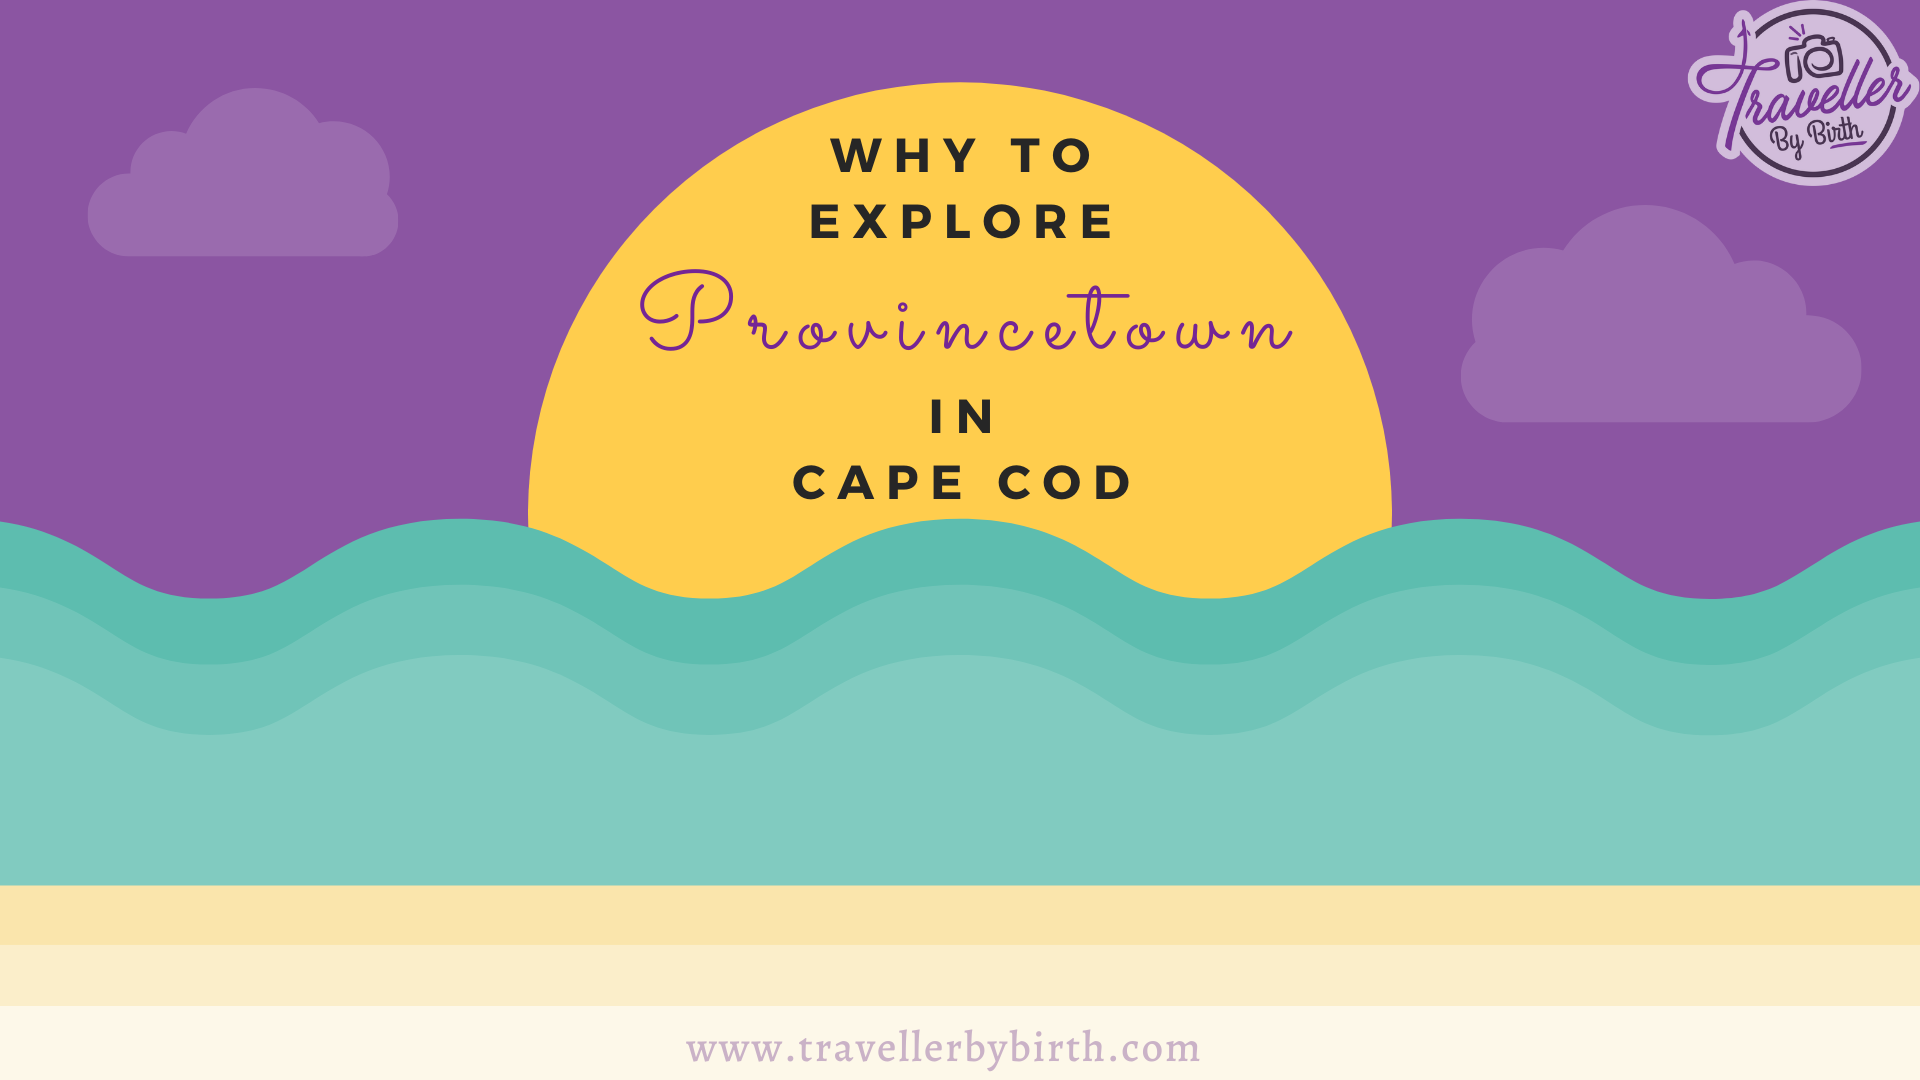 Why to explore Provincetown in Cape Cod?